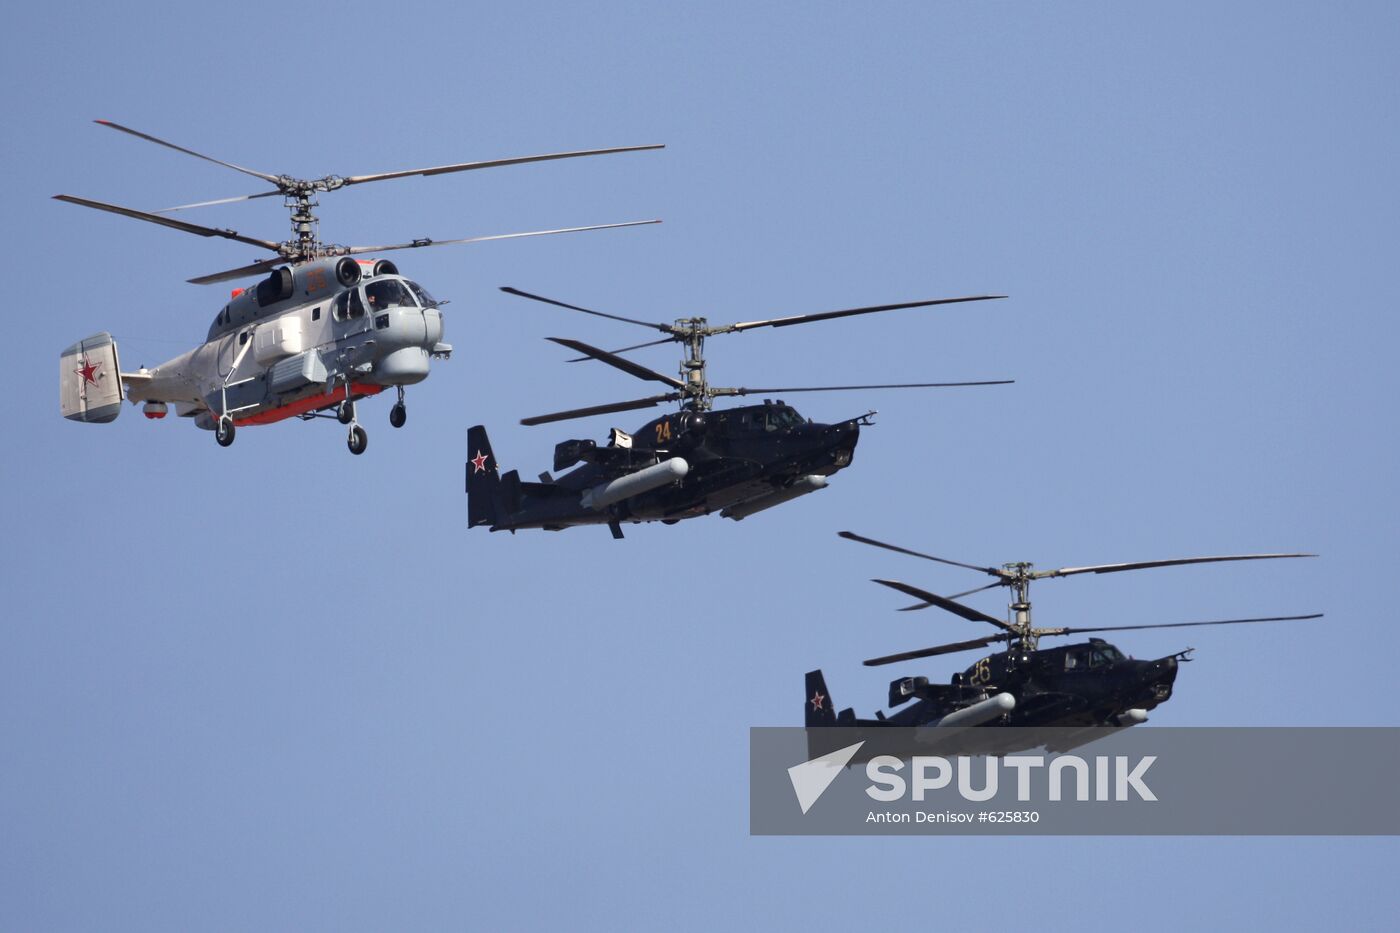 Kamov design bureau helicopters in parade air show